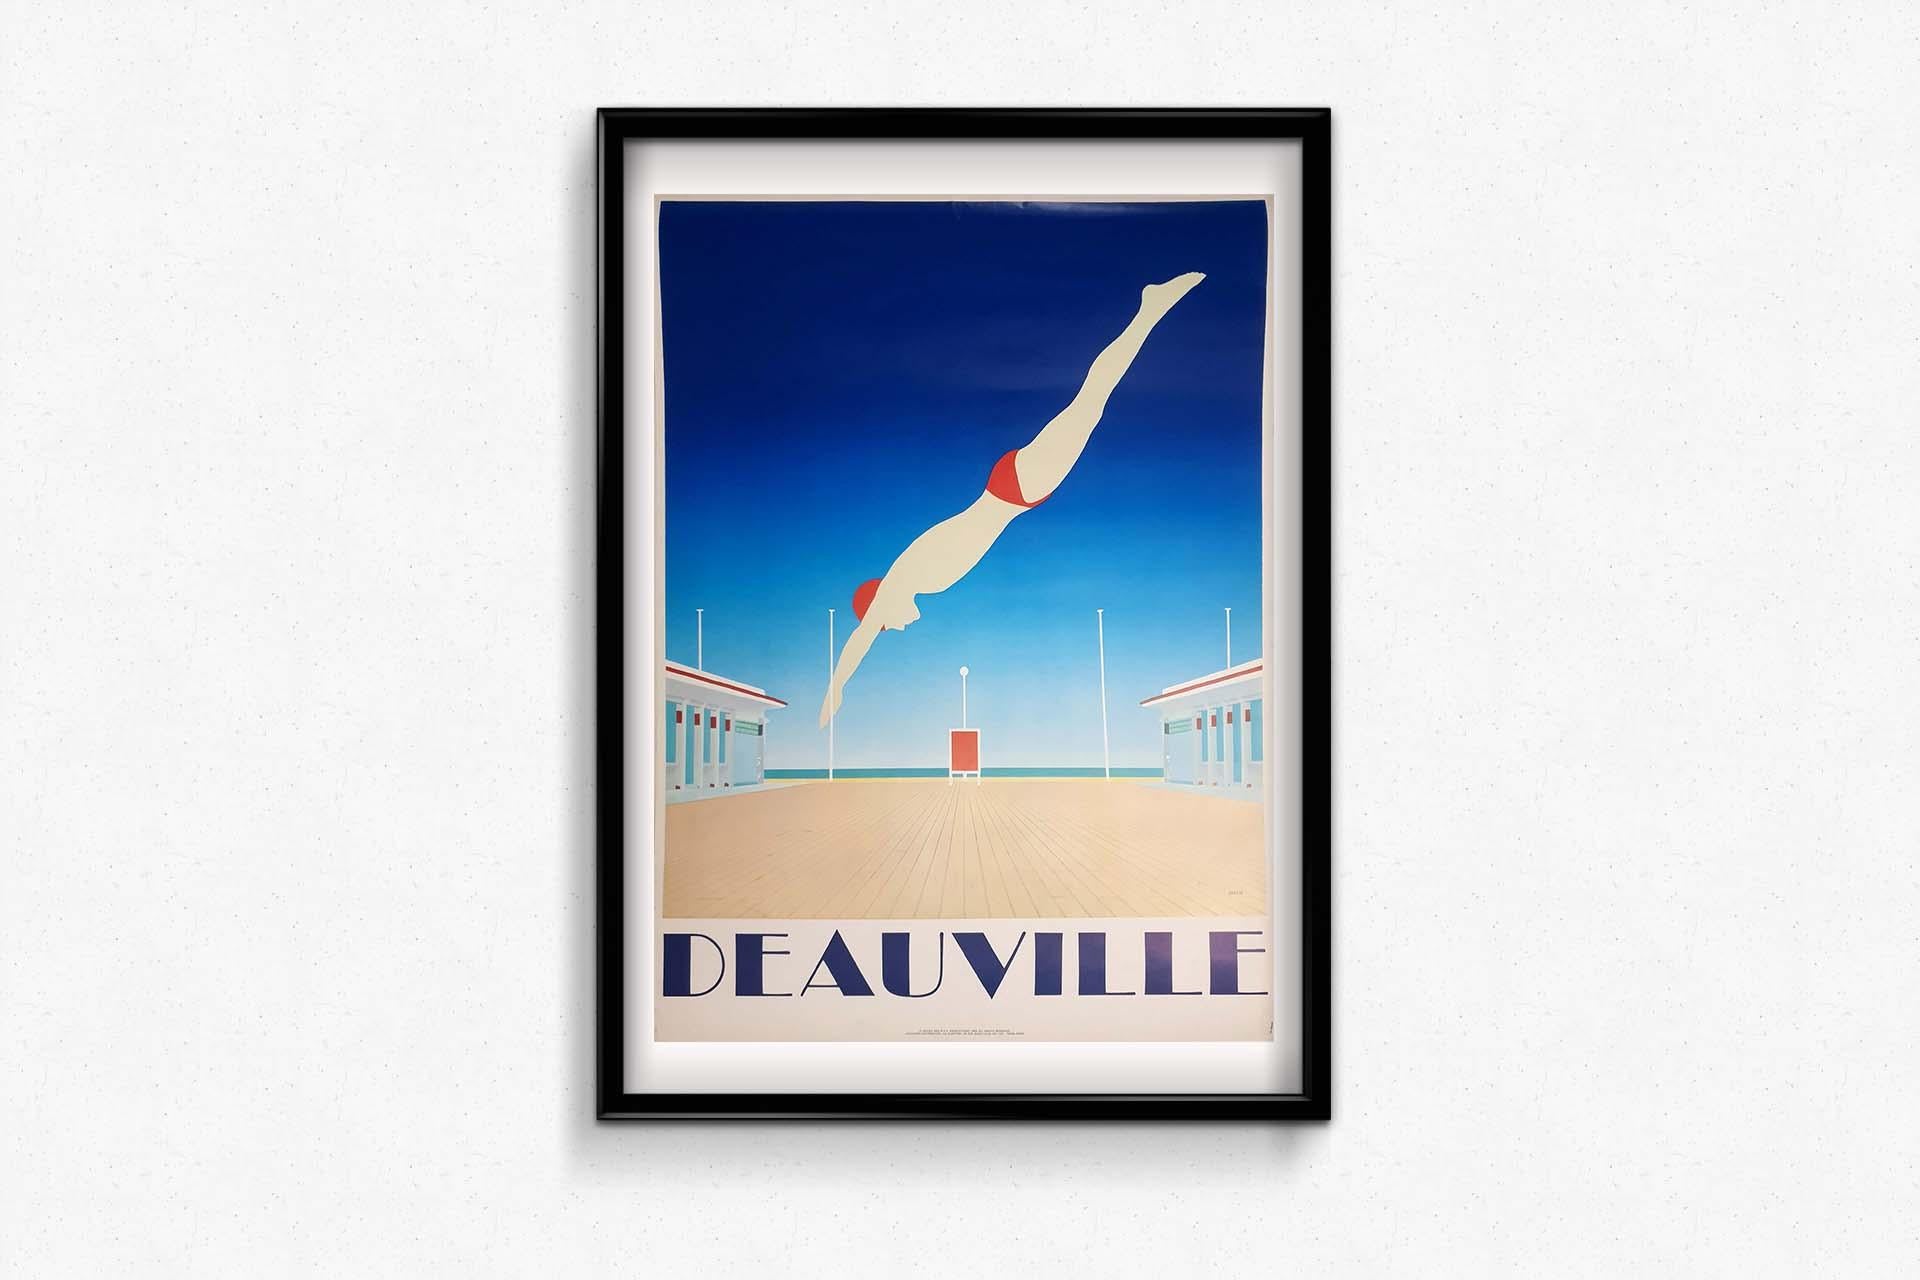 Original poster realized by Razzia, of his real name Gérard Courbouleix-Dénériaz, in 1982, in a totally art deco style, in order to promote tourism in the city of Deauville.

Razzia is one of the last poster artists to survive in an era dominated by